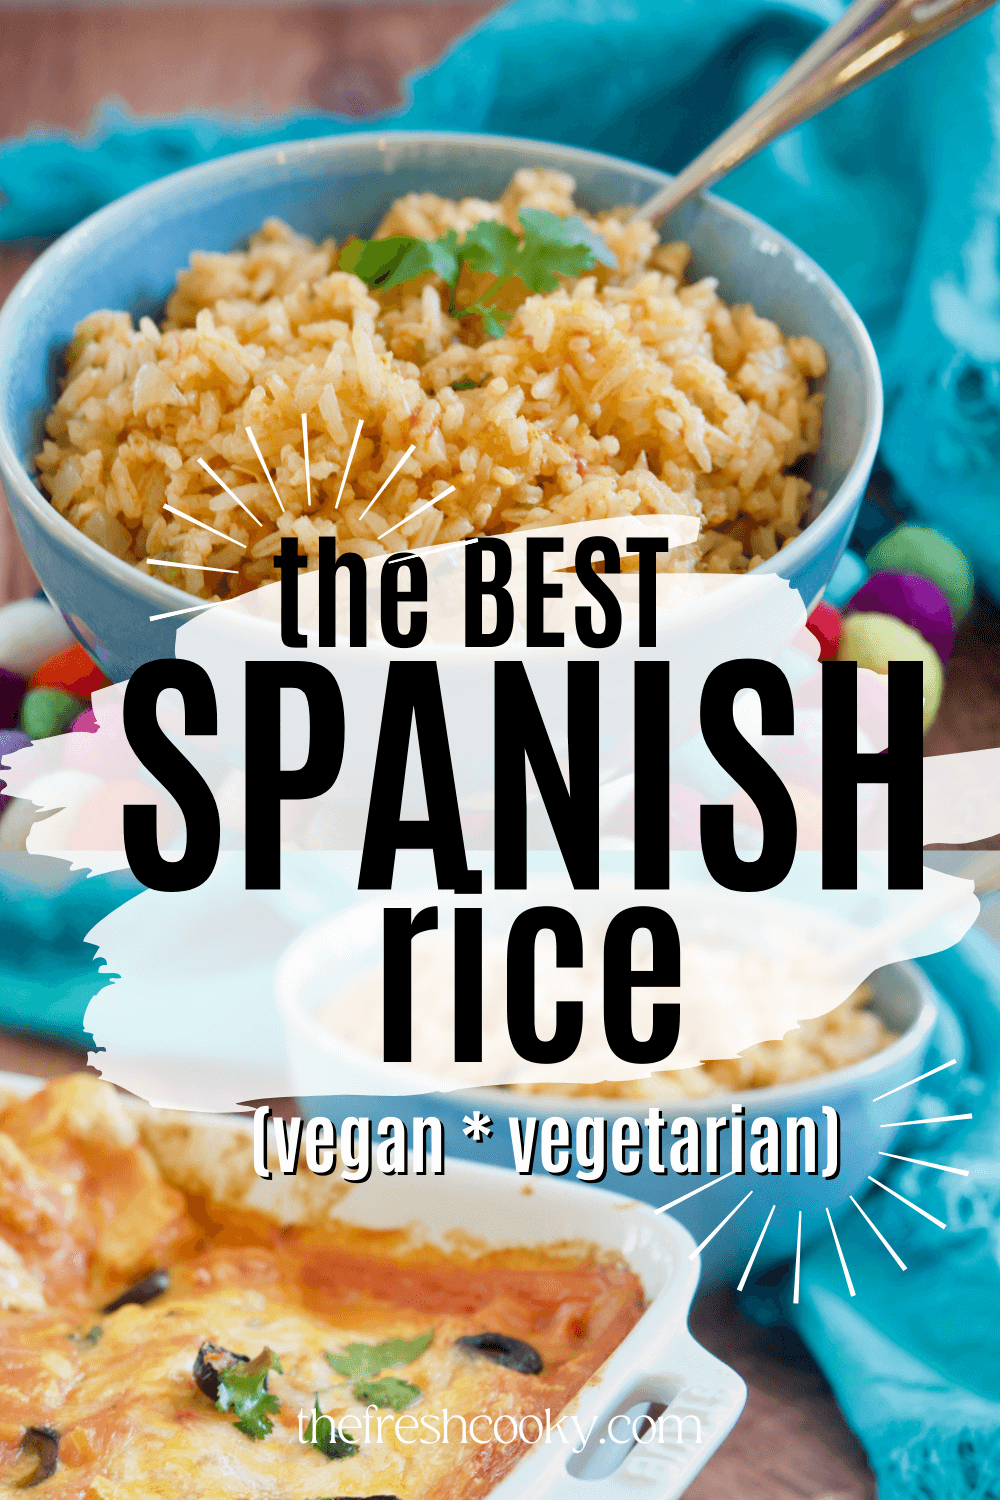 Pin for the best spanish rice, vegan and vegetarian rice. Bowl of rice on top, bottom enchiladas with rice in background.